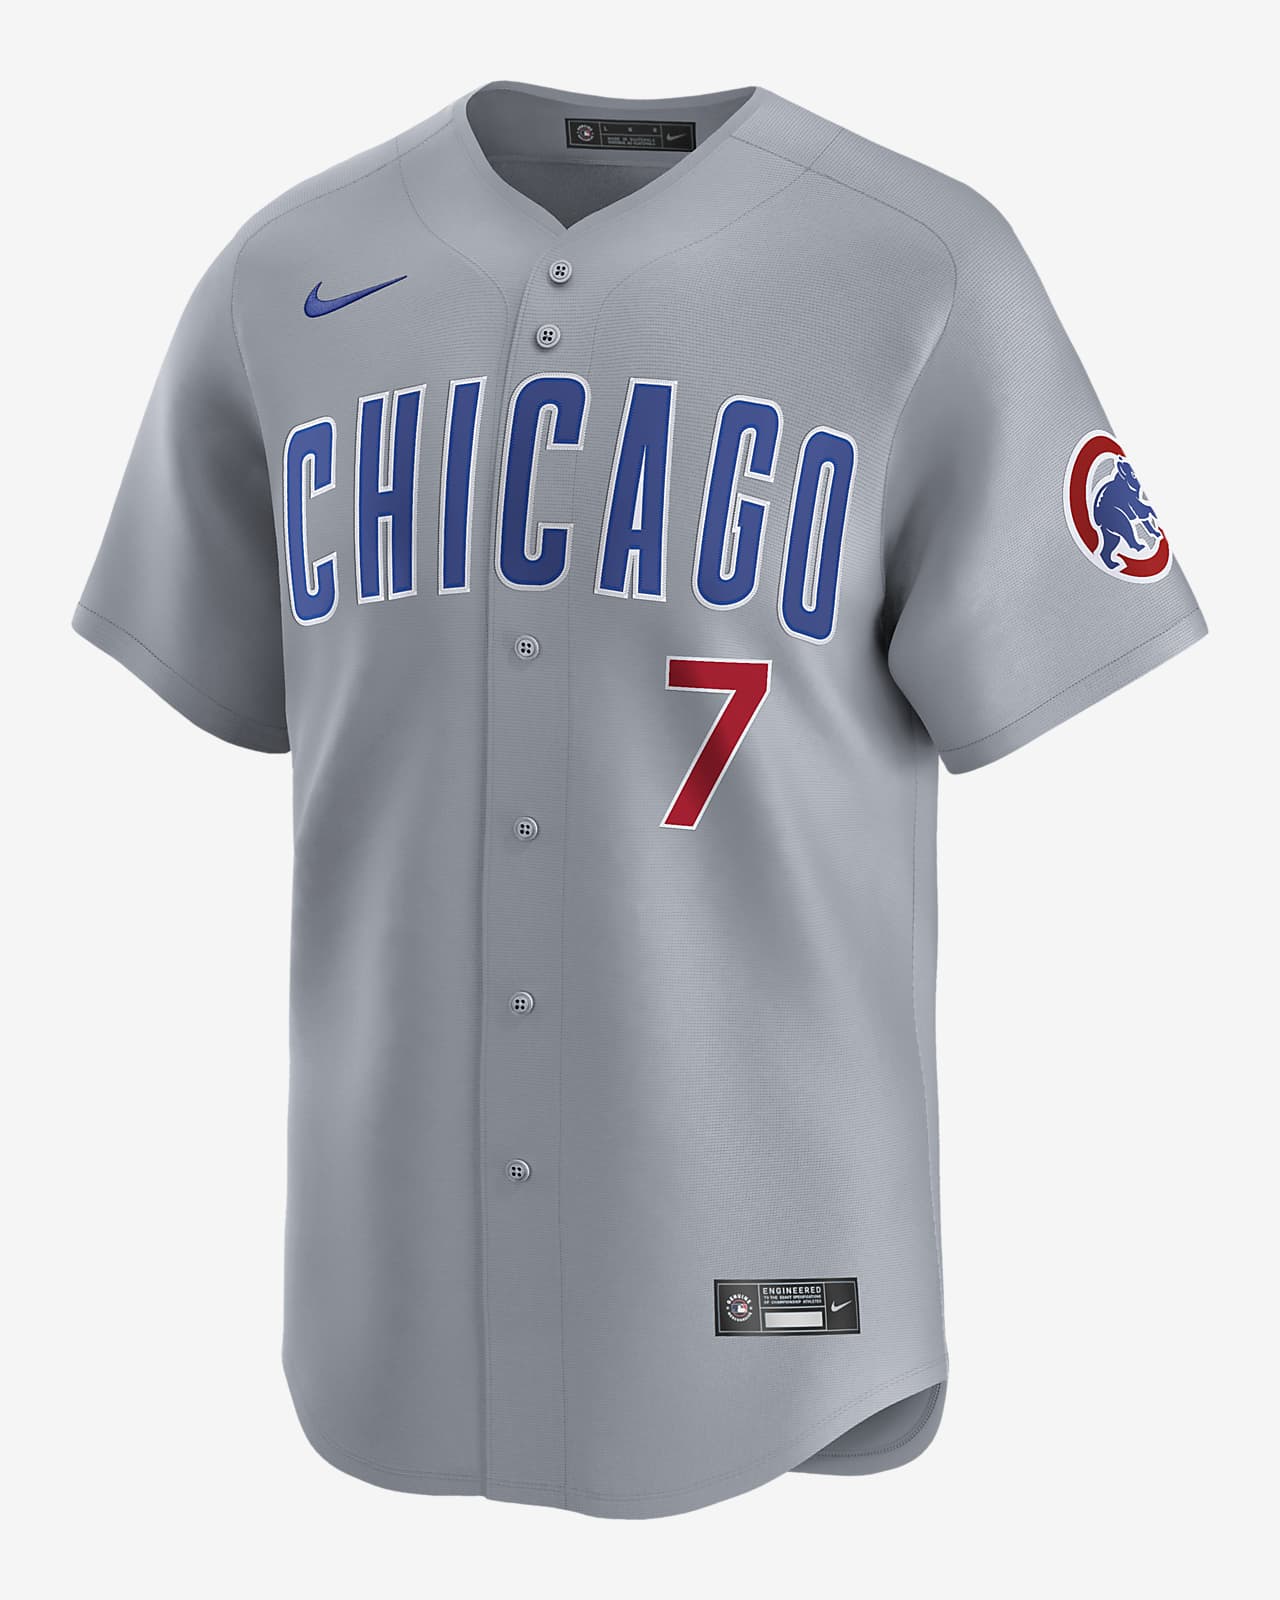 Dansby Swanson Chicago Cubs Men's Nike Dri-FIT ADV MLB Limited Jersey